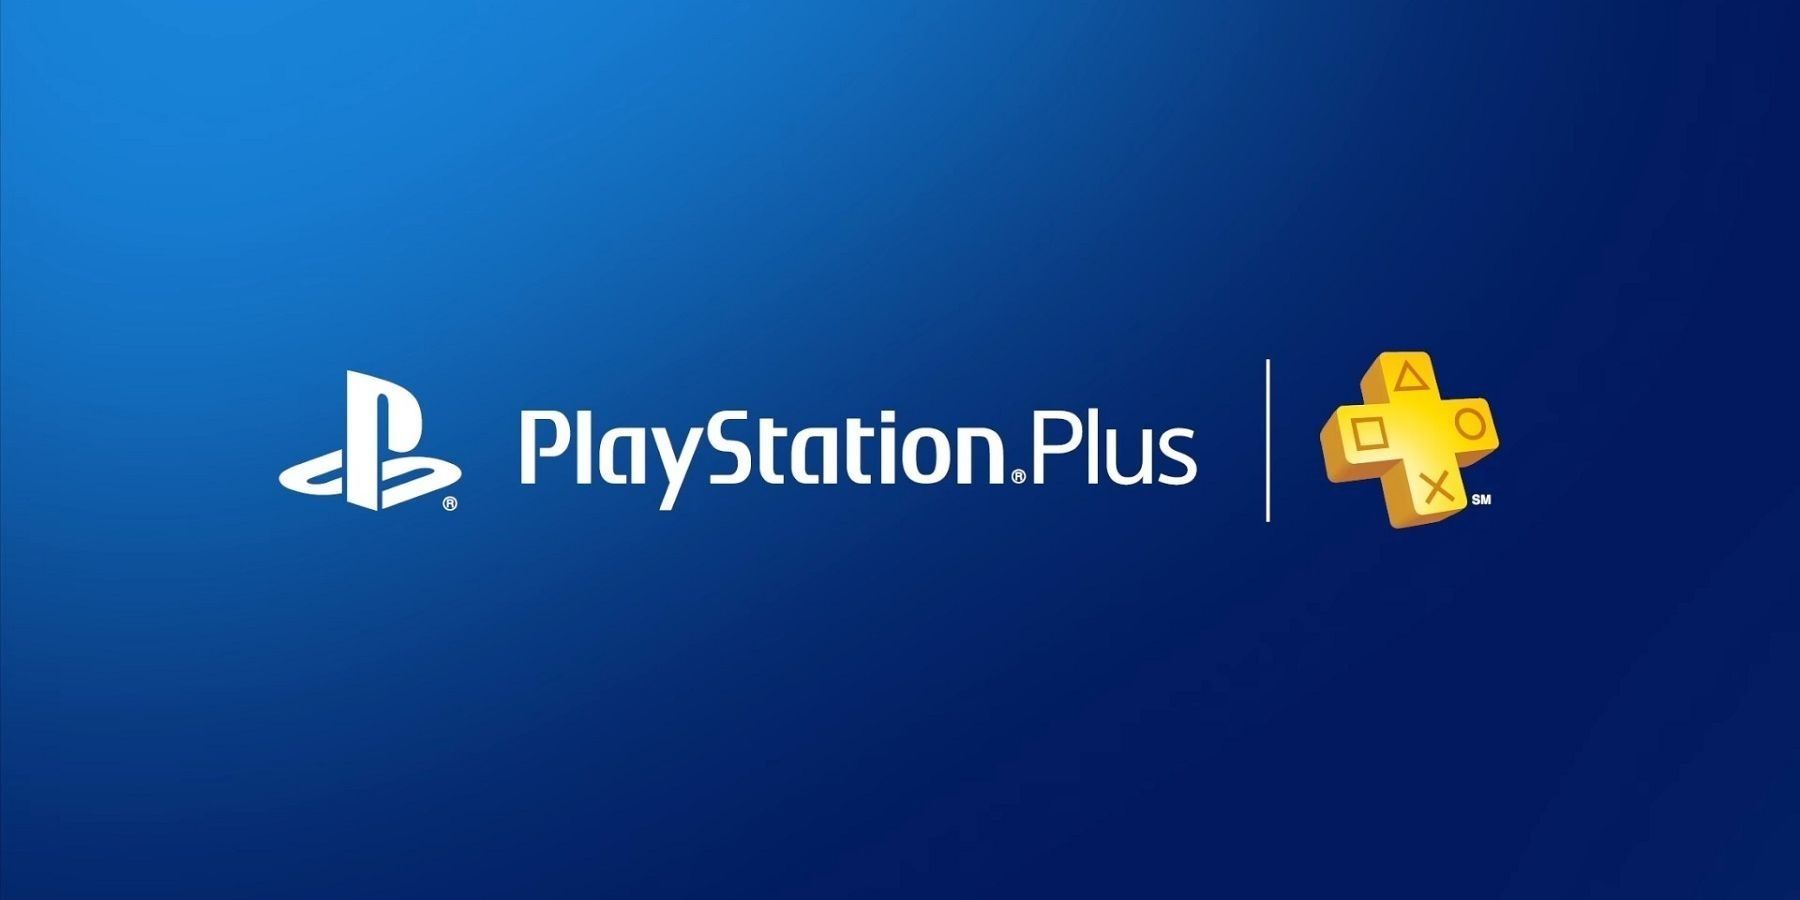 ps plus extra losing 9 games in march